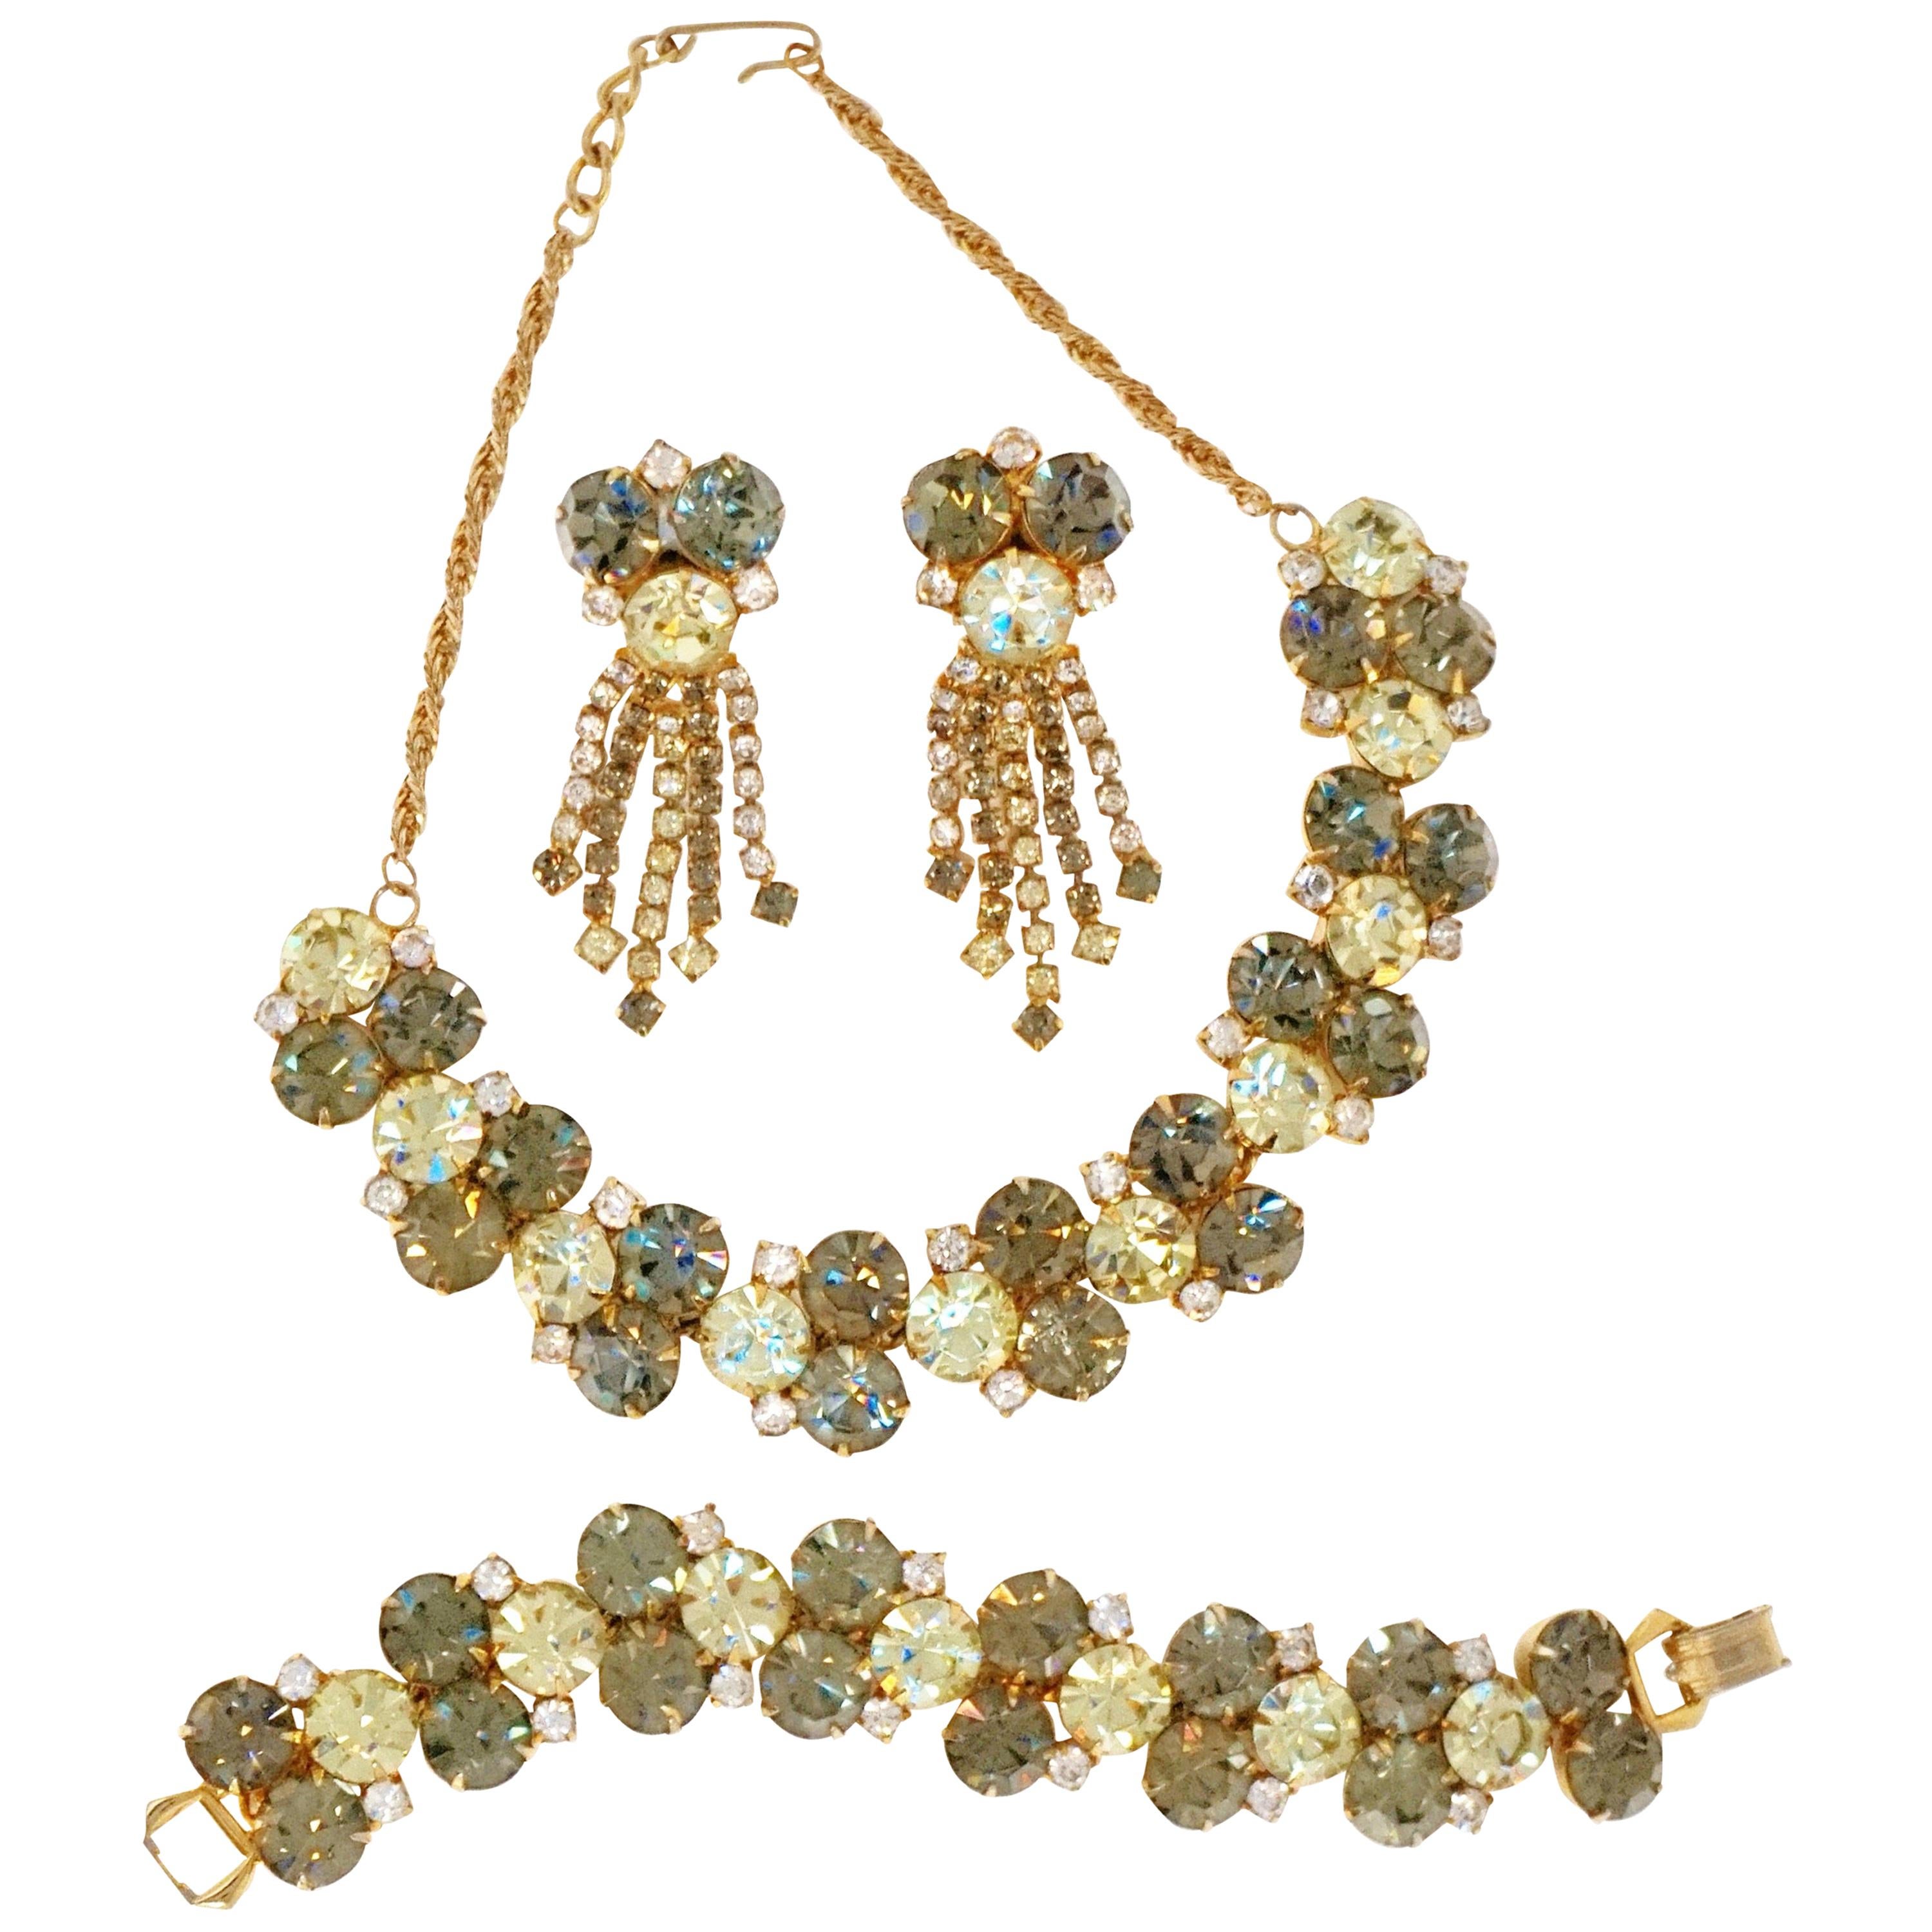 1960s Hobé Green Rhinestone Parure with Necklace, Bracelet & Earrings, Signed For Sale